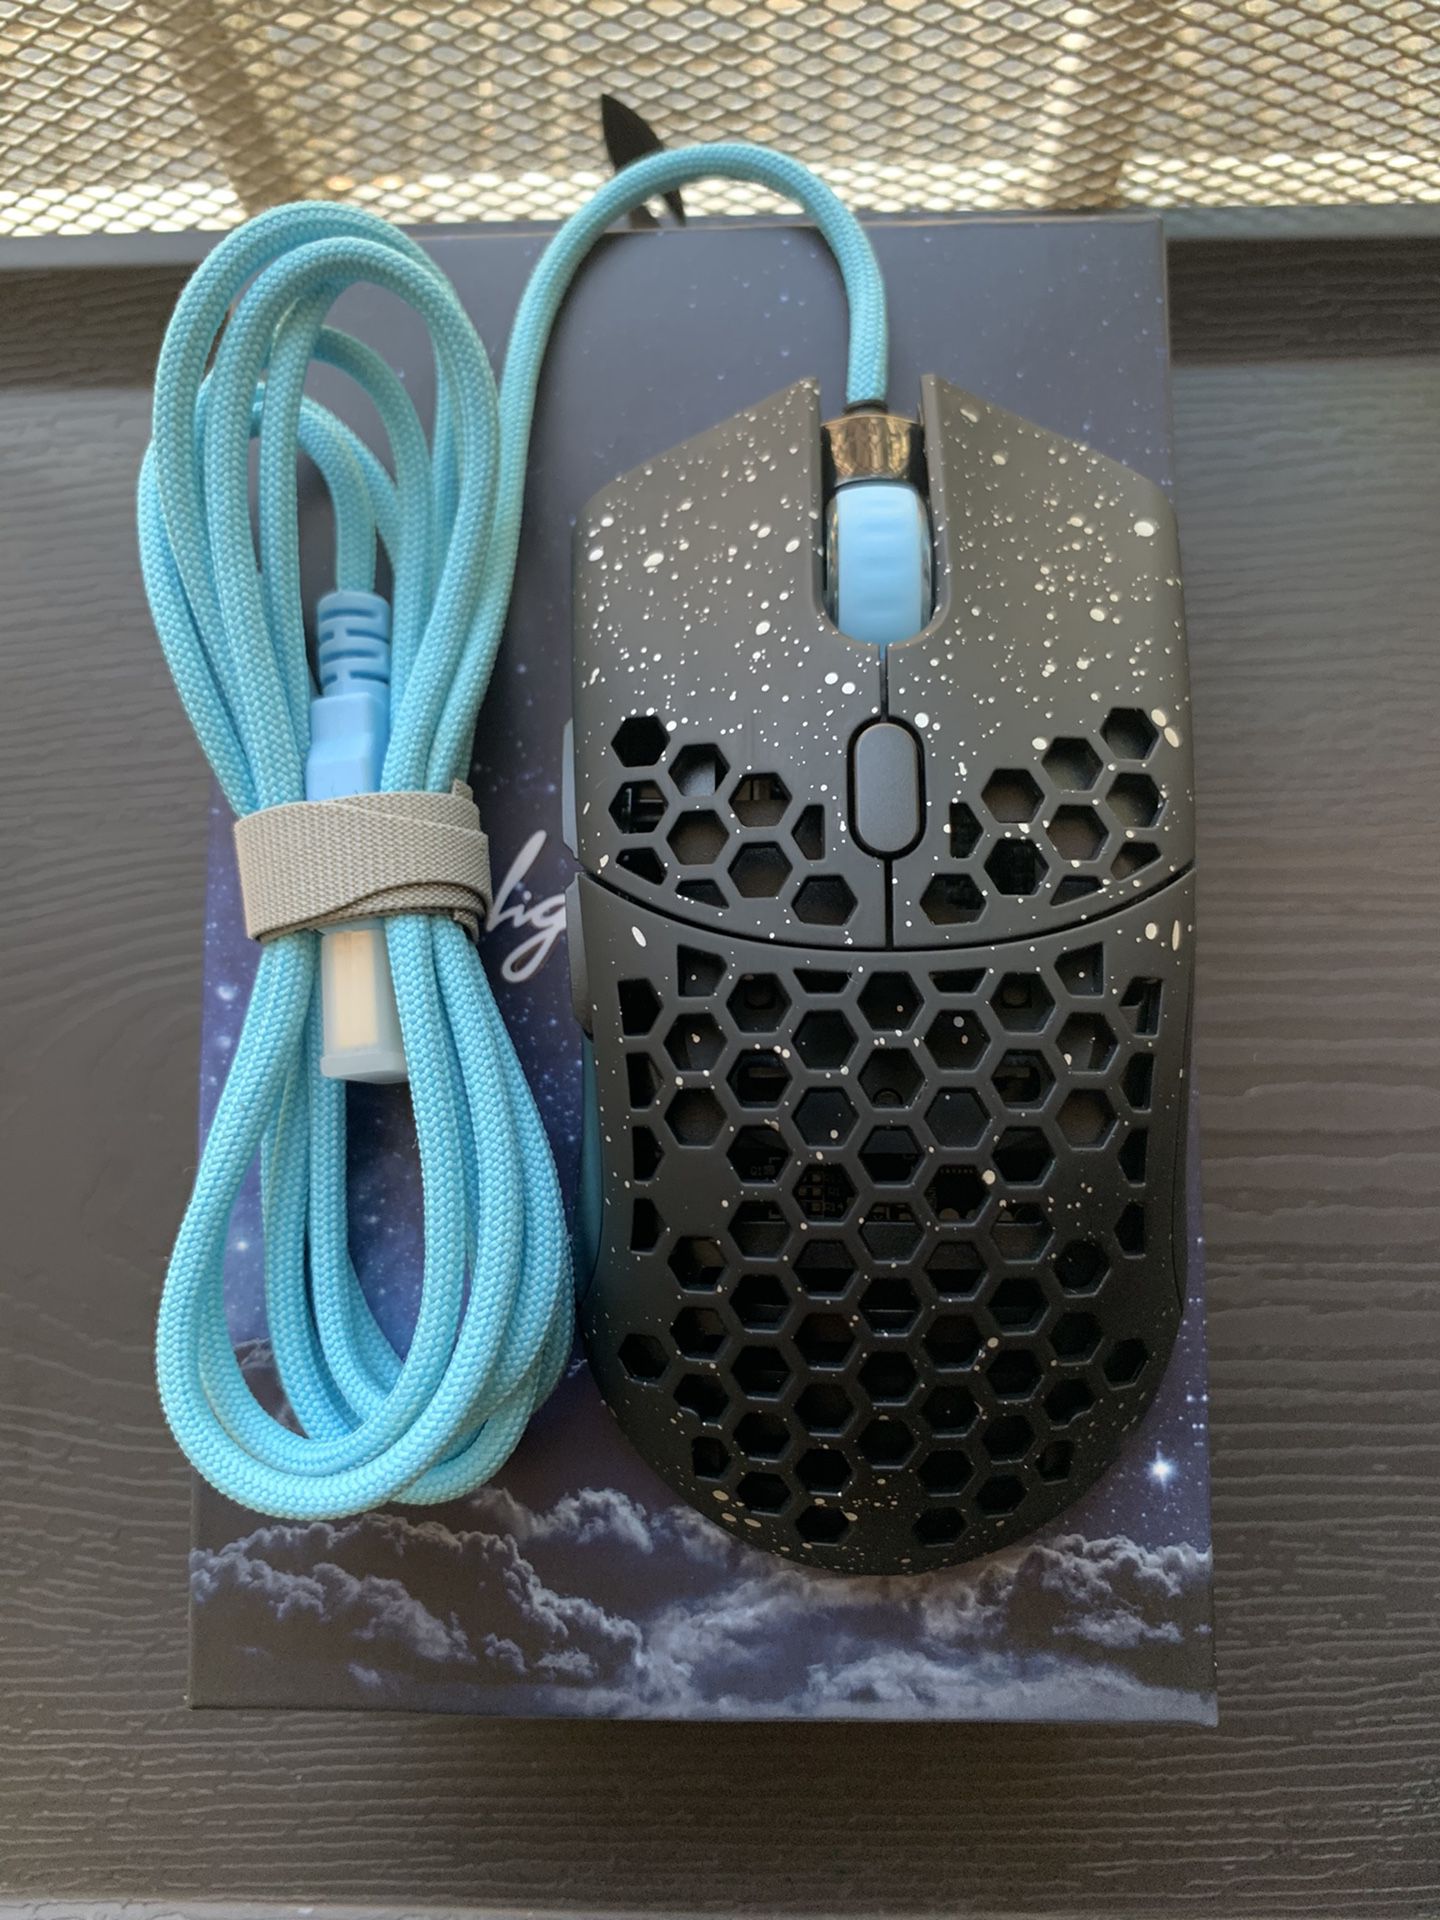 Finalmouse Ultralight Phantom with Paracord and Hyperglides